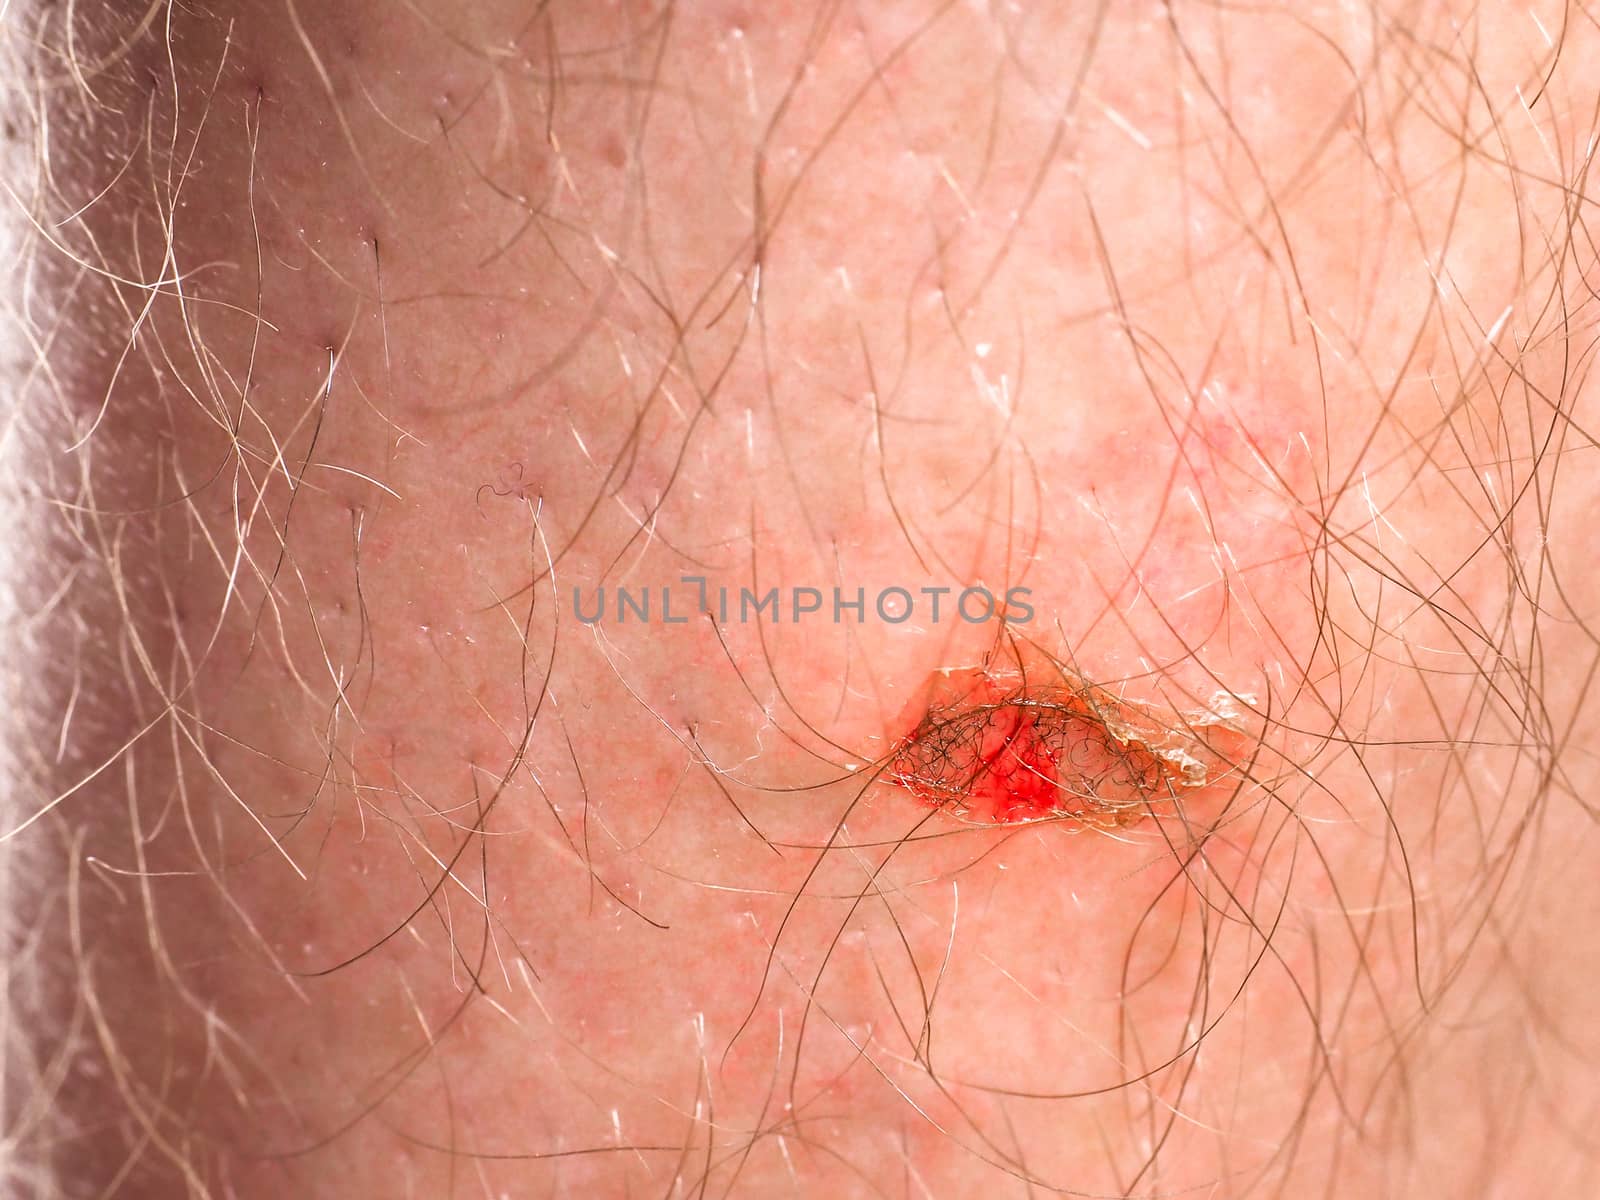 Person with injury on skin under hair